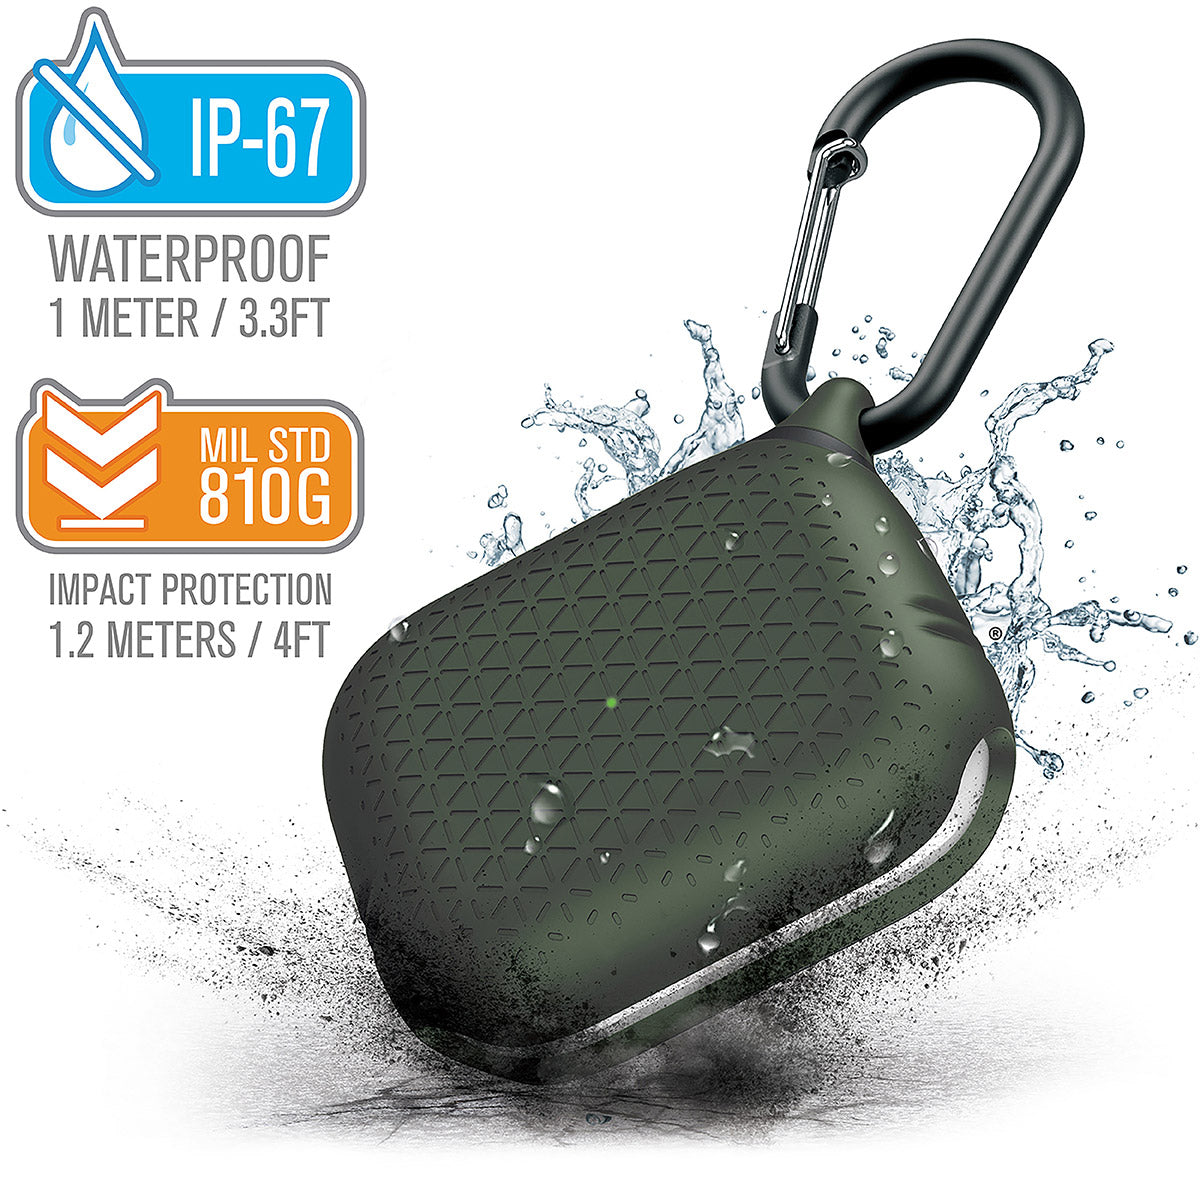 catalyst airpods pro gen 2 1 waterproof case carabiner premium edition army green with cracked floor and splashes of water text reads ip-67 waterproof 1 meter 3.3ft mil std 810g impact protection 1.2 meters 4ft